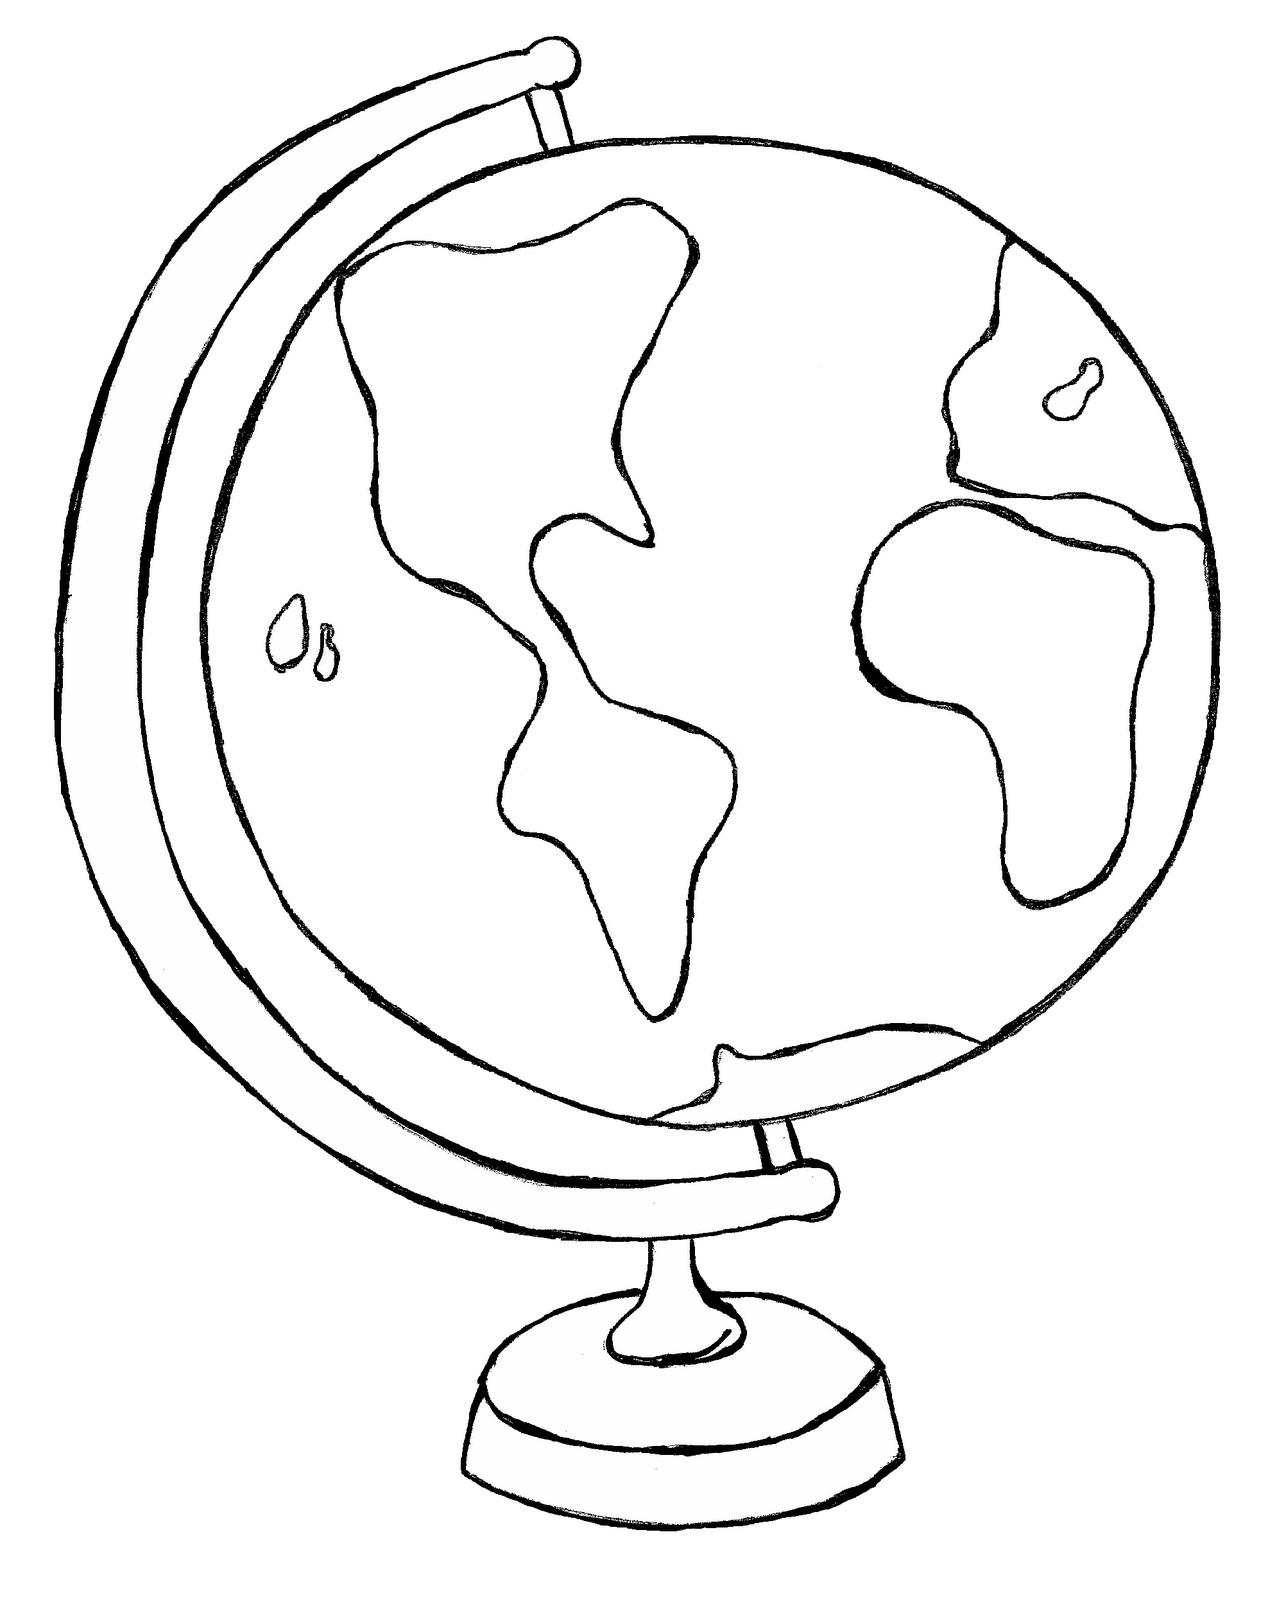 Maps clipart globes, Maps globes Transparent FREE for